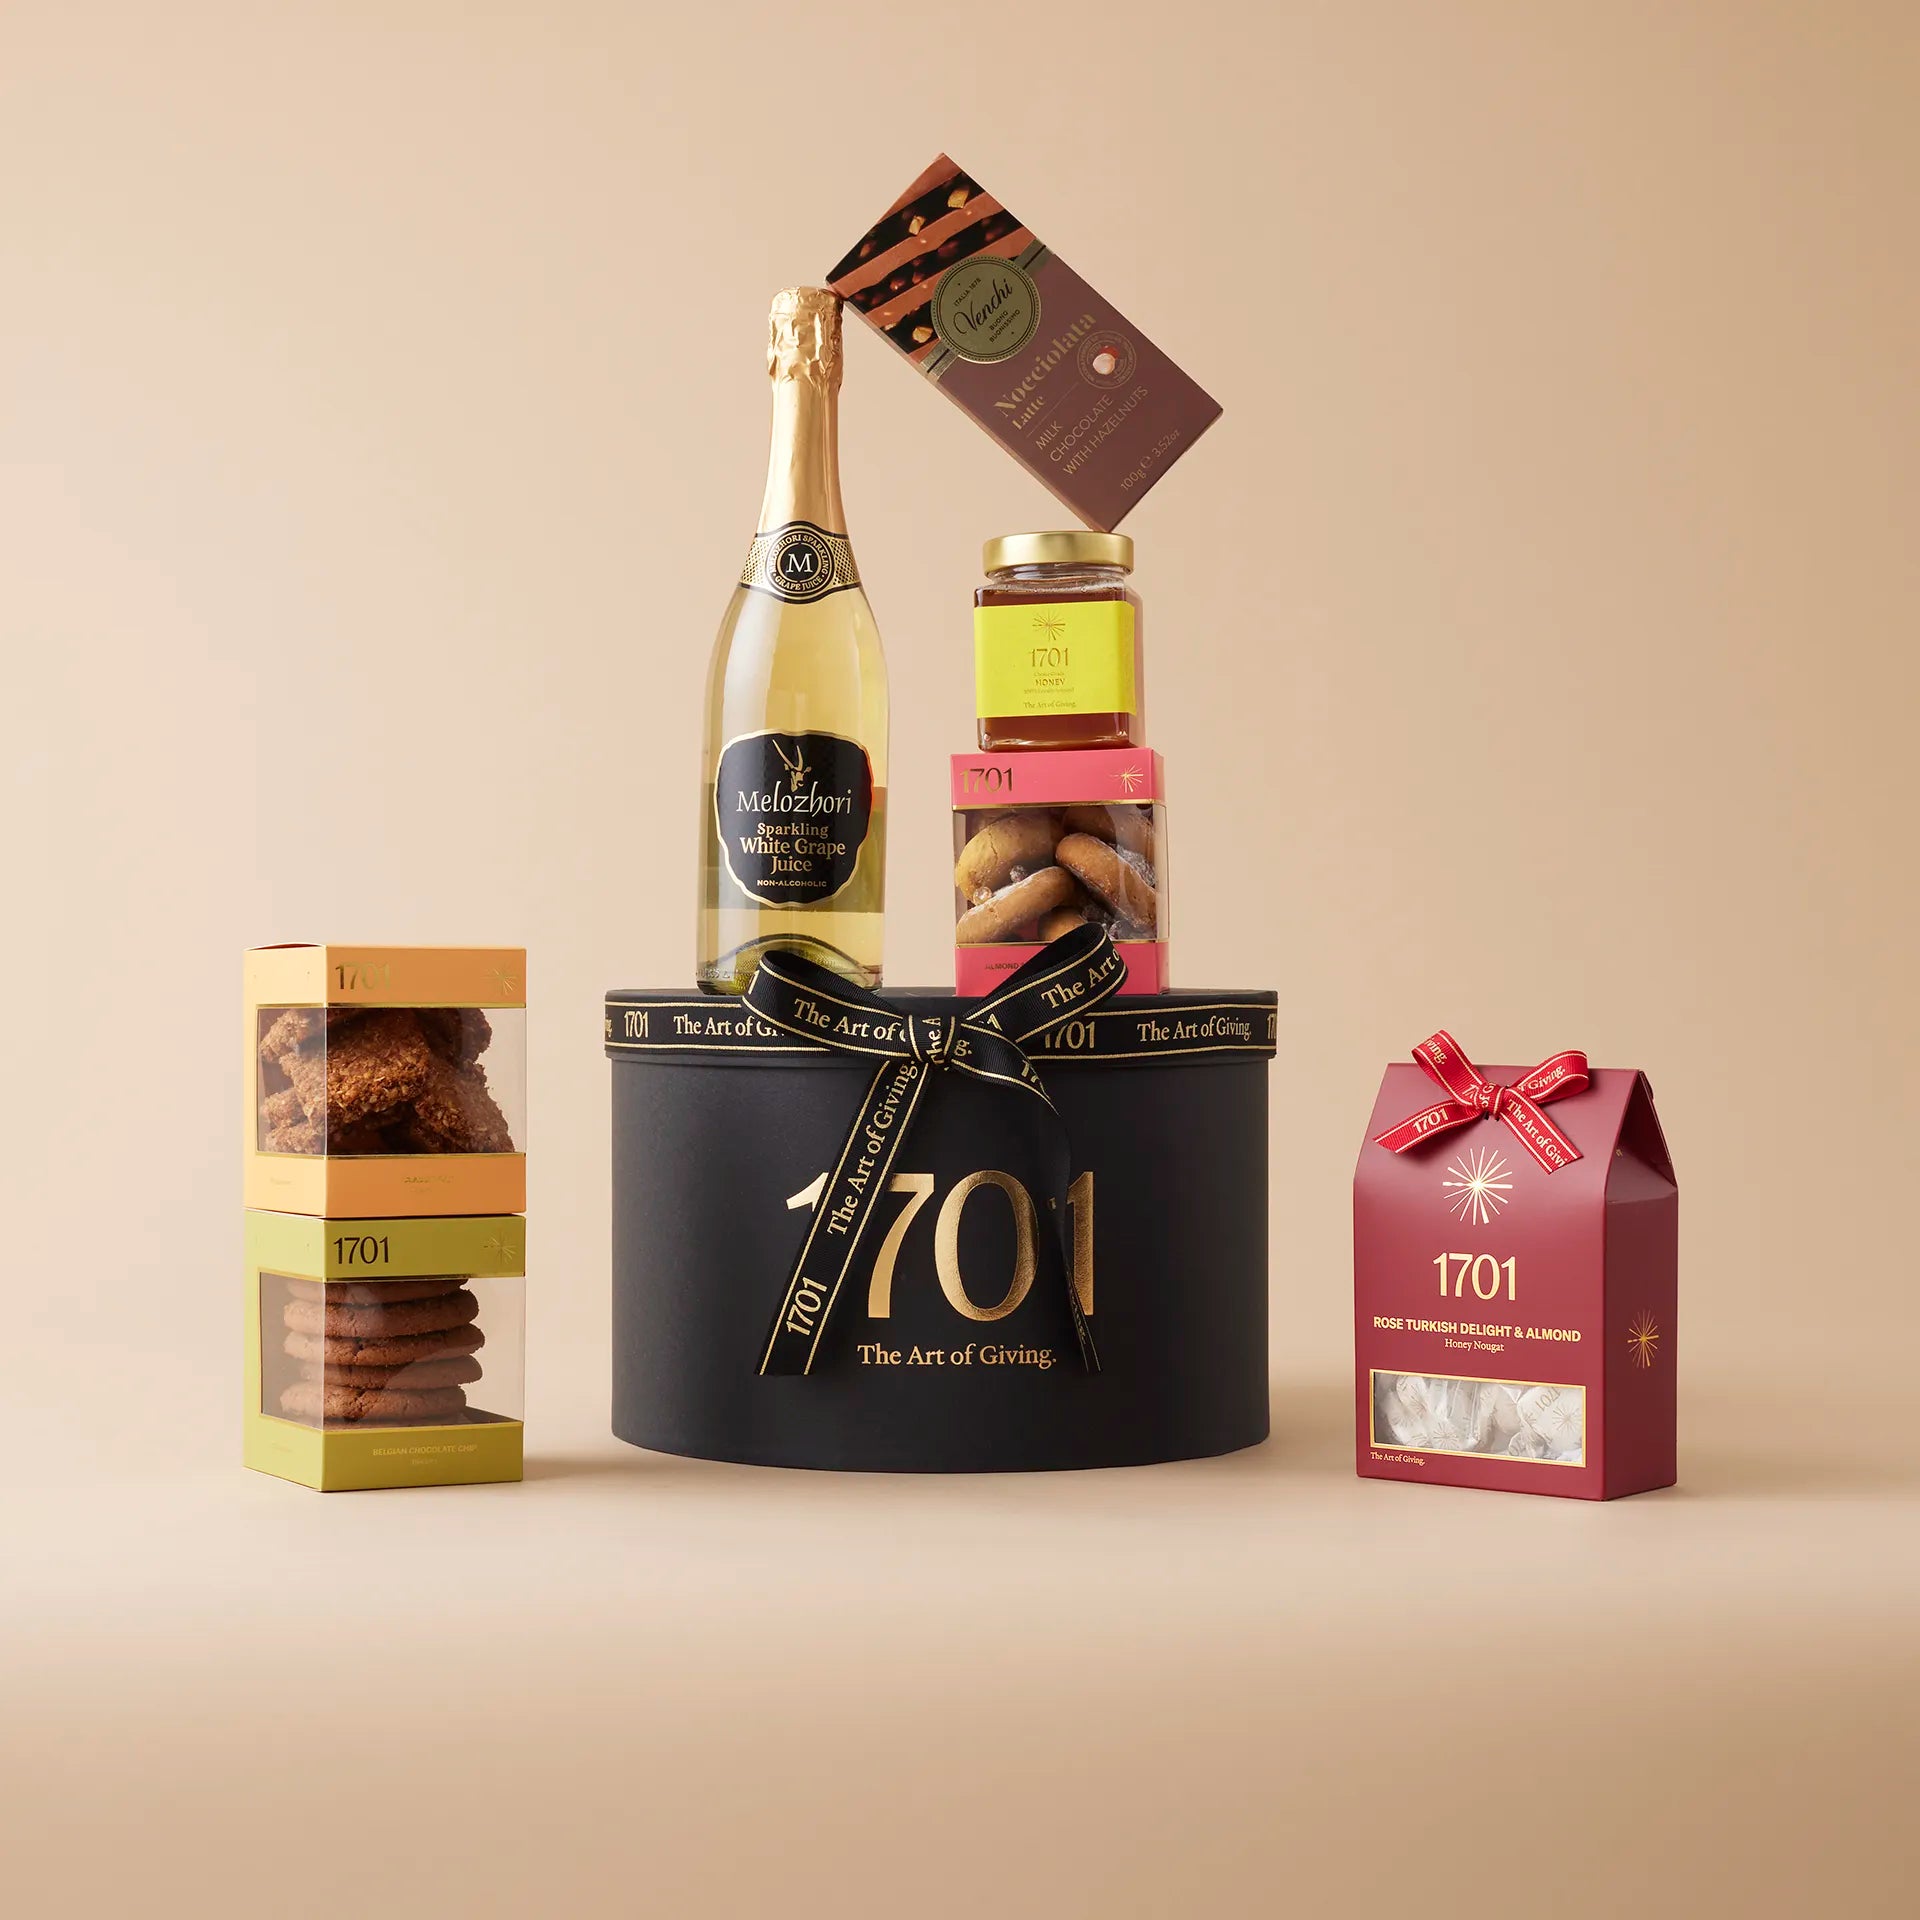 The Luxury White Grape Juice Gift Box is presented on a warm background. The gift box includes handcrafted honey nougat, incredible biscuits, 1701 farm honey, imported Italian chocolate, and Melozhori white grape juice. This gift box is perfect for those who appreciate celebrations without alcoholic drinks and the luxury of fine treats. The brown and gold design adds a touch of elegance, making it perfect for any occasion.